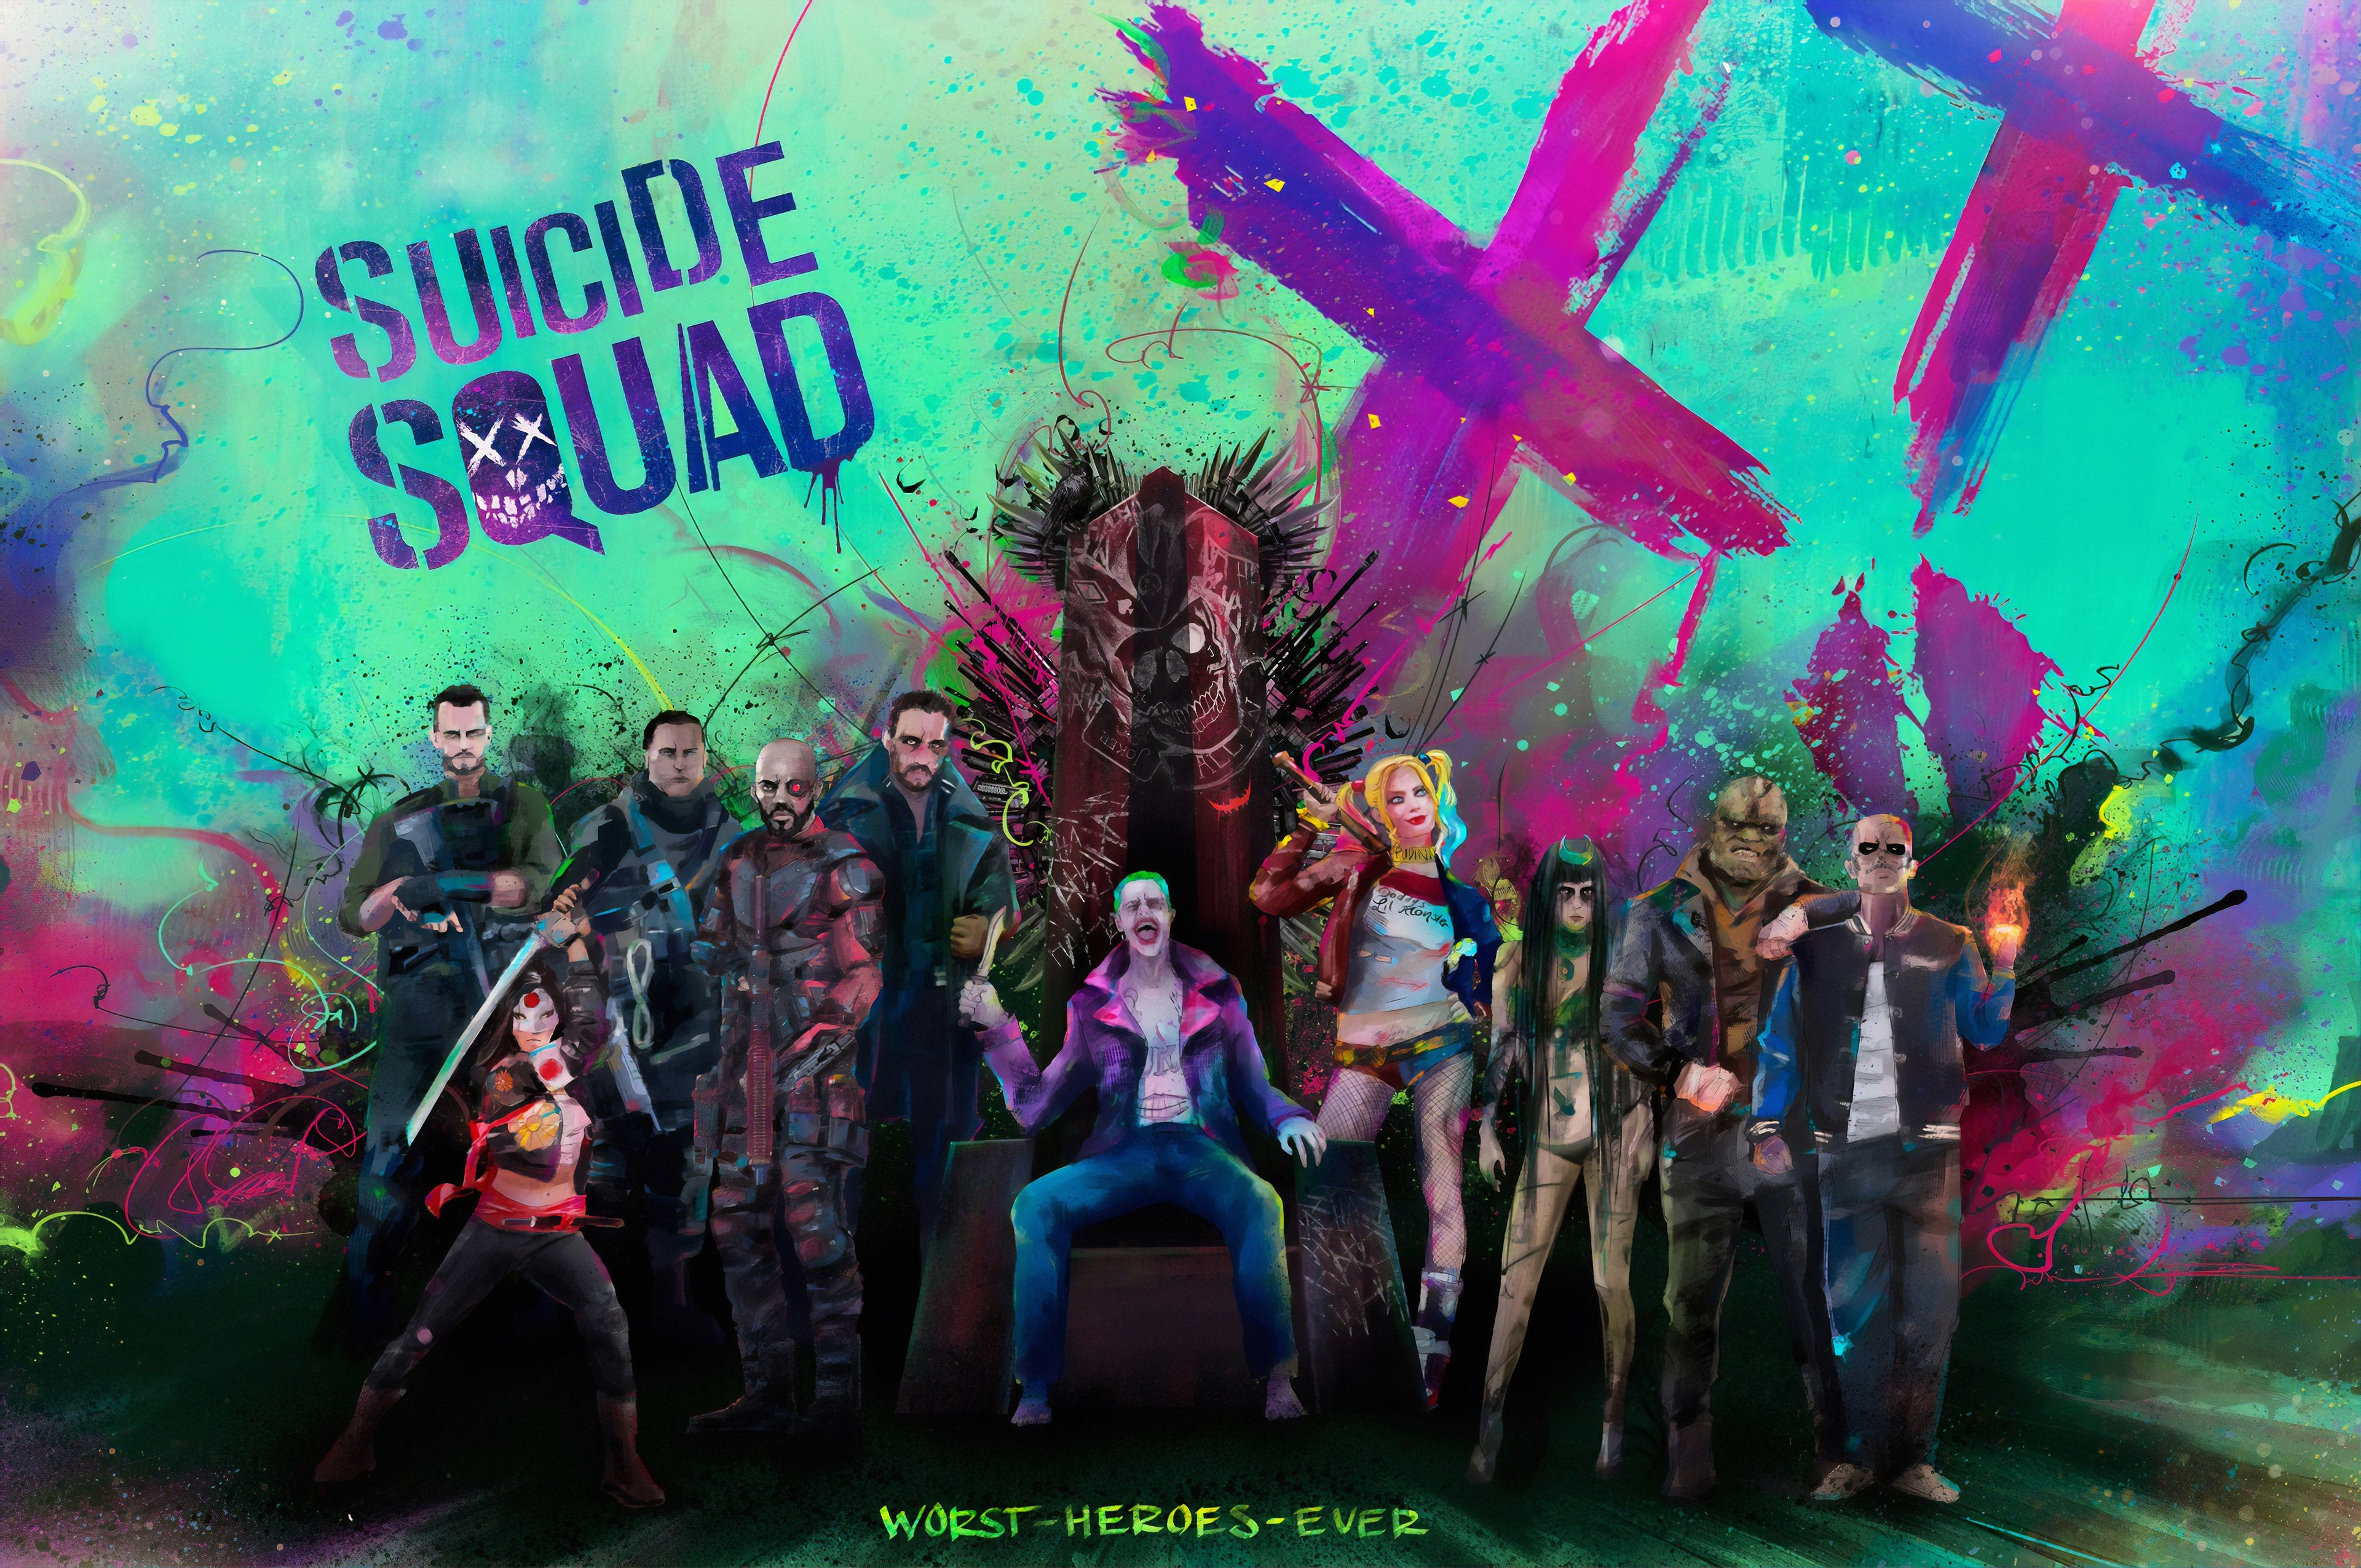 1440x2992 The Suicide Squad Art 1440x2992 Resolution Wallpaper, HD.